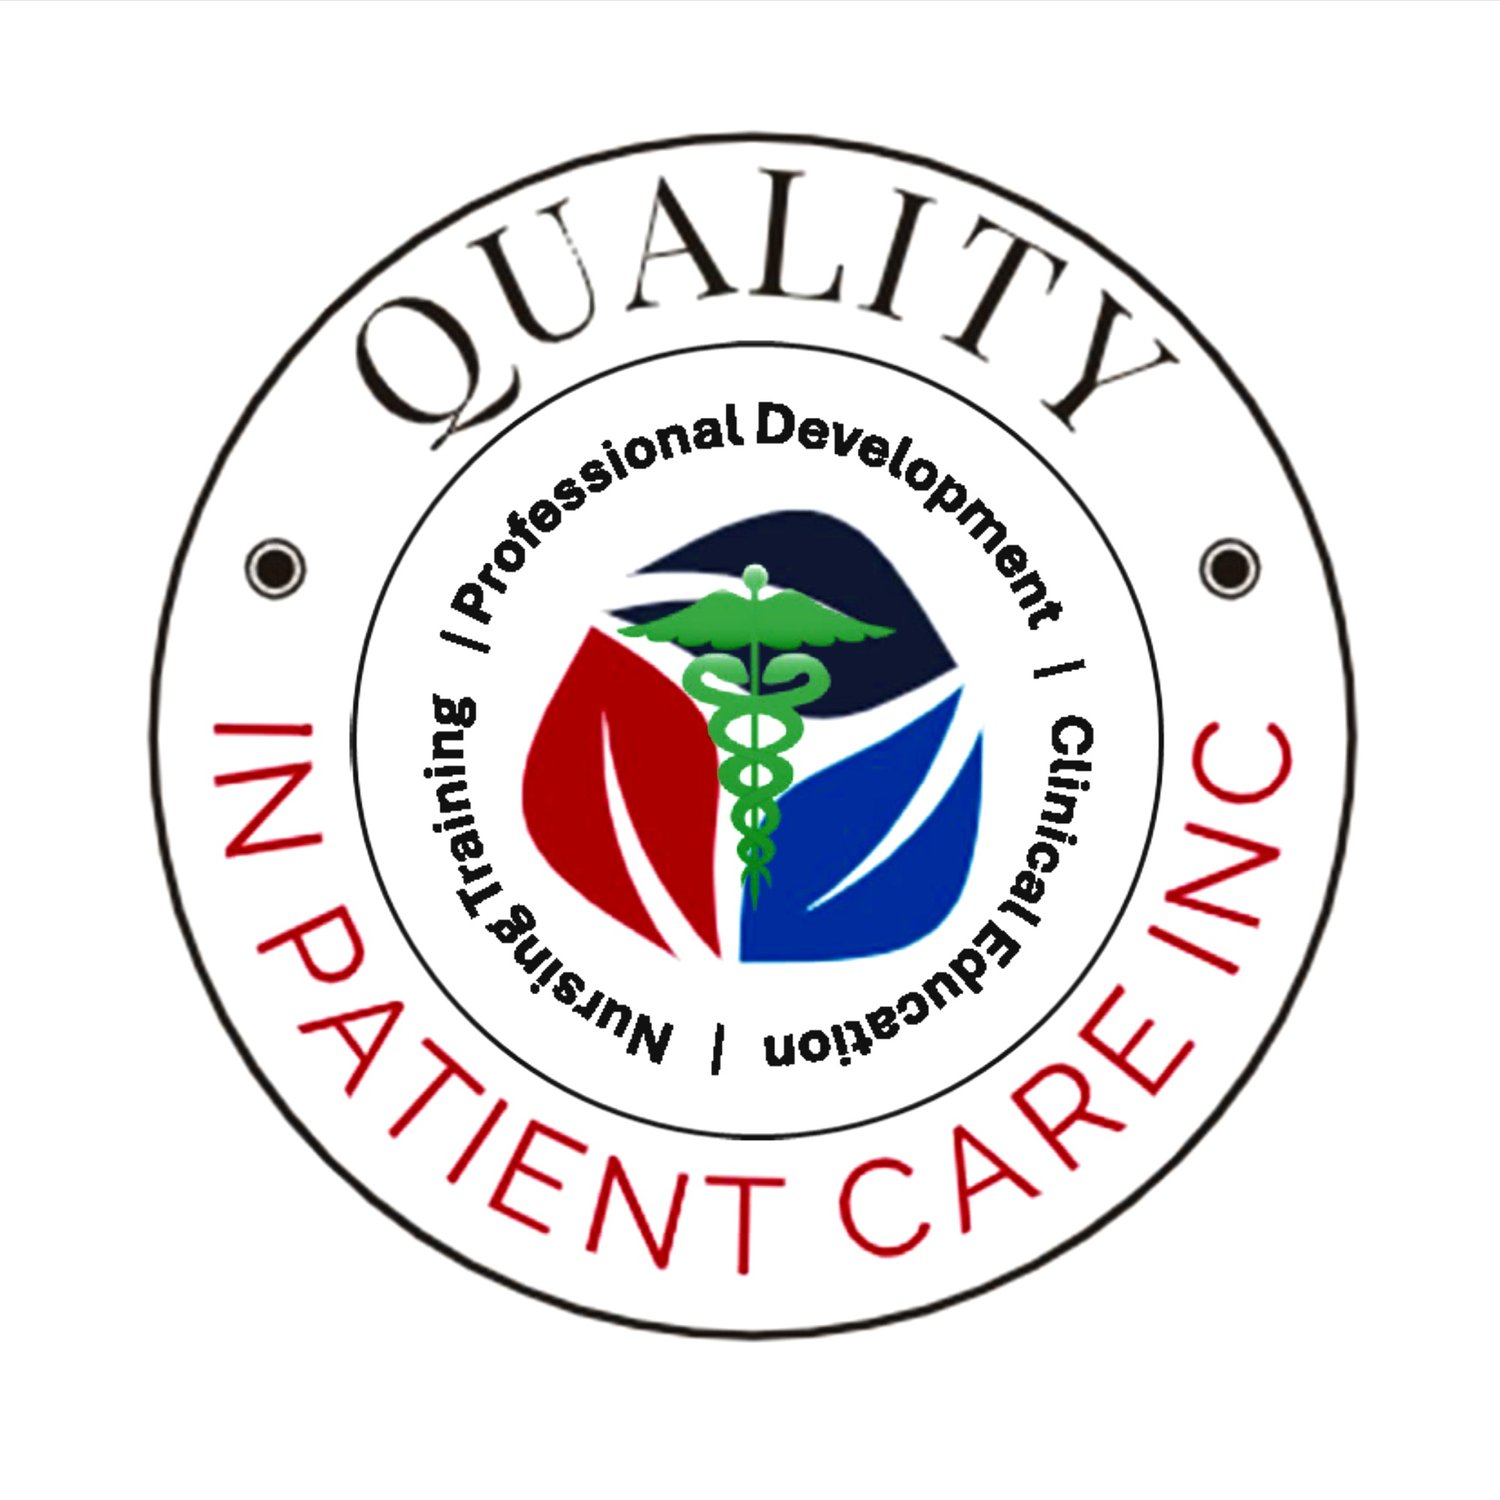 Quality In Patient Care